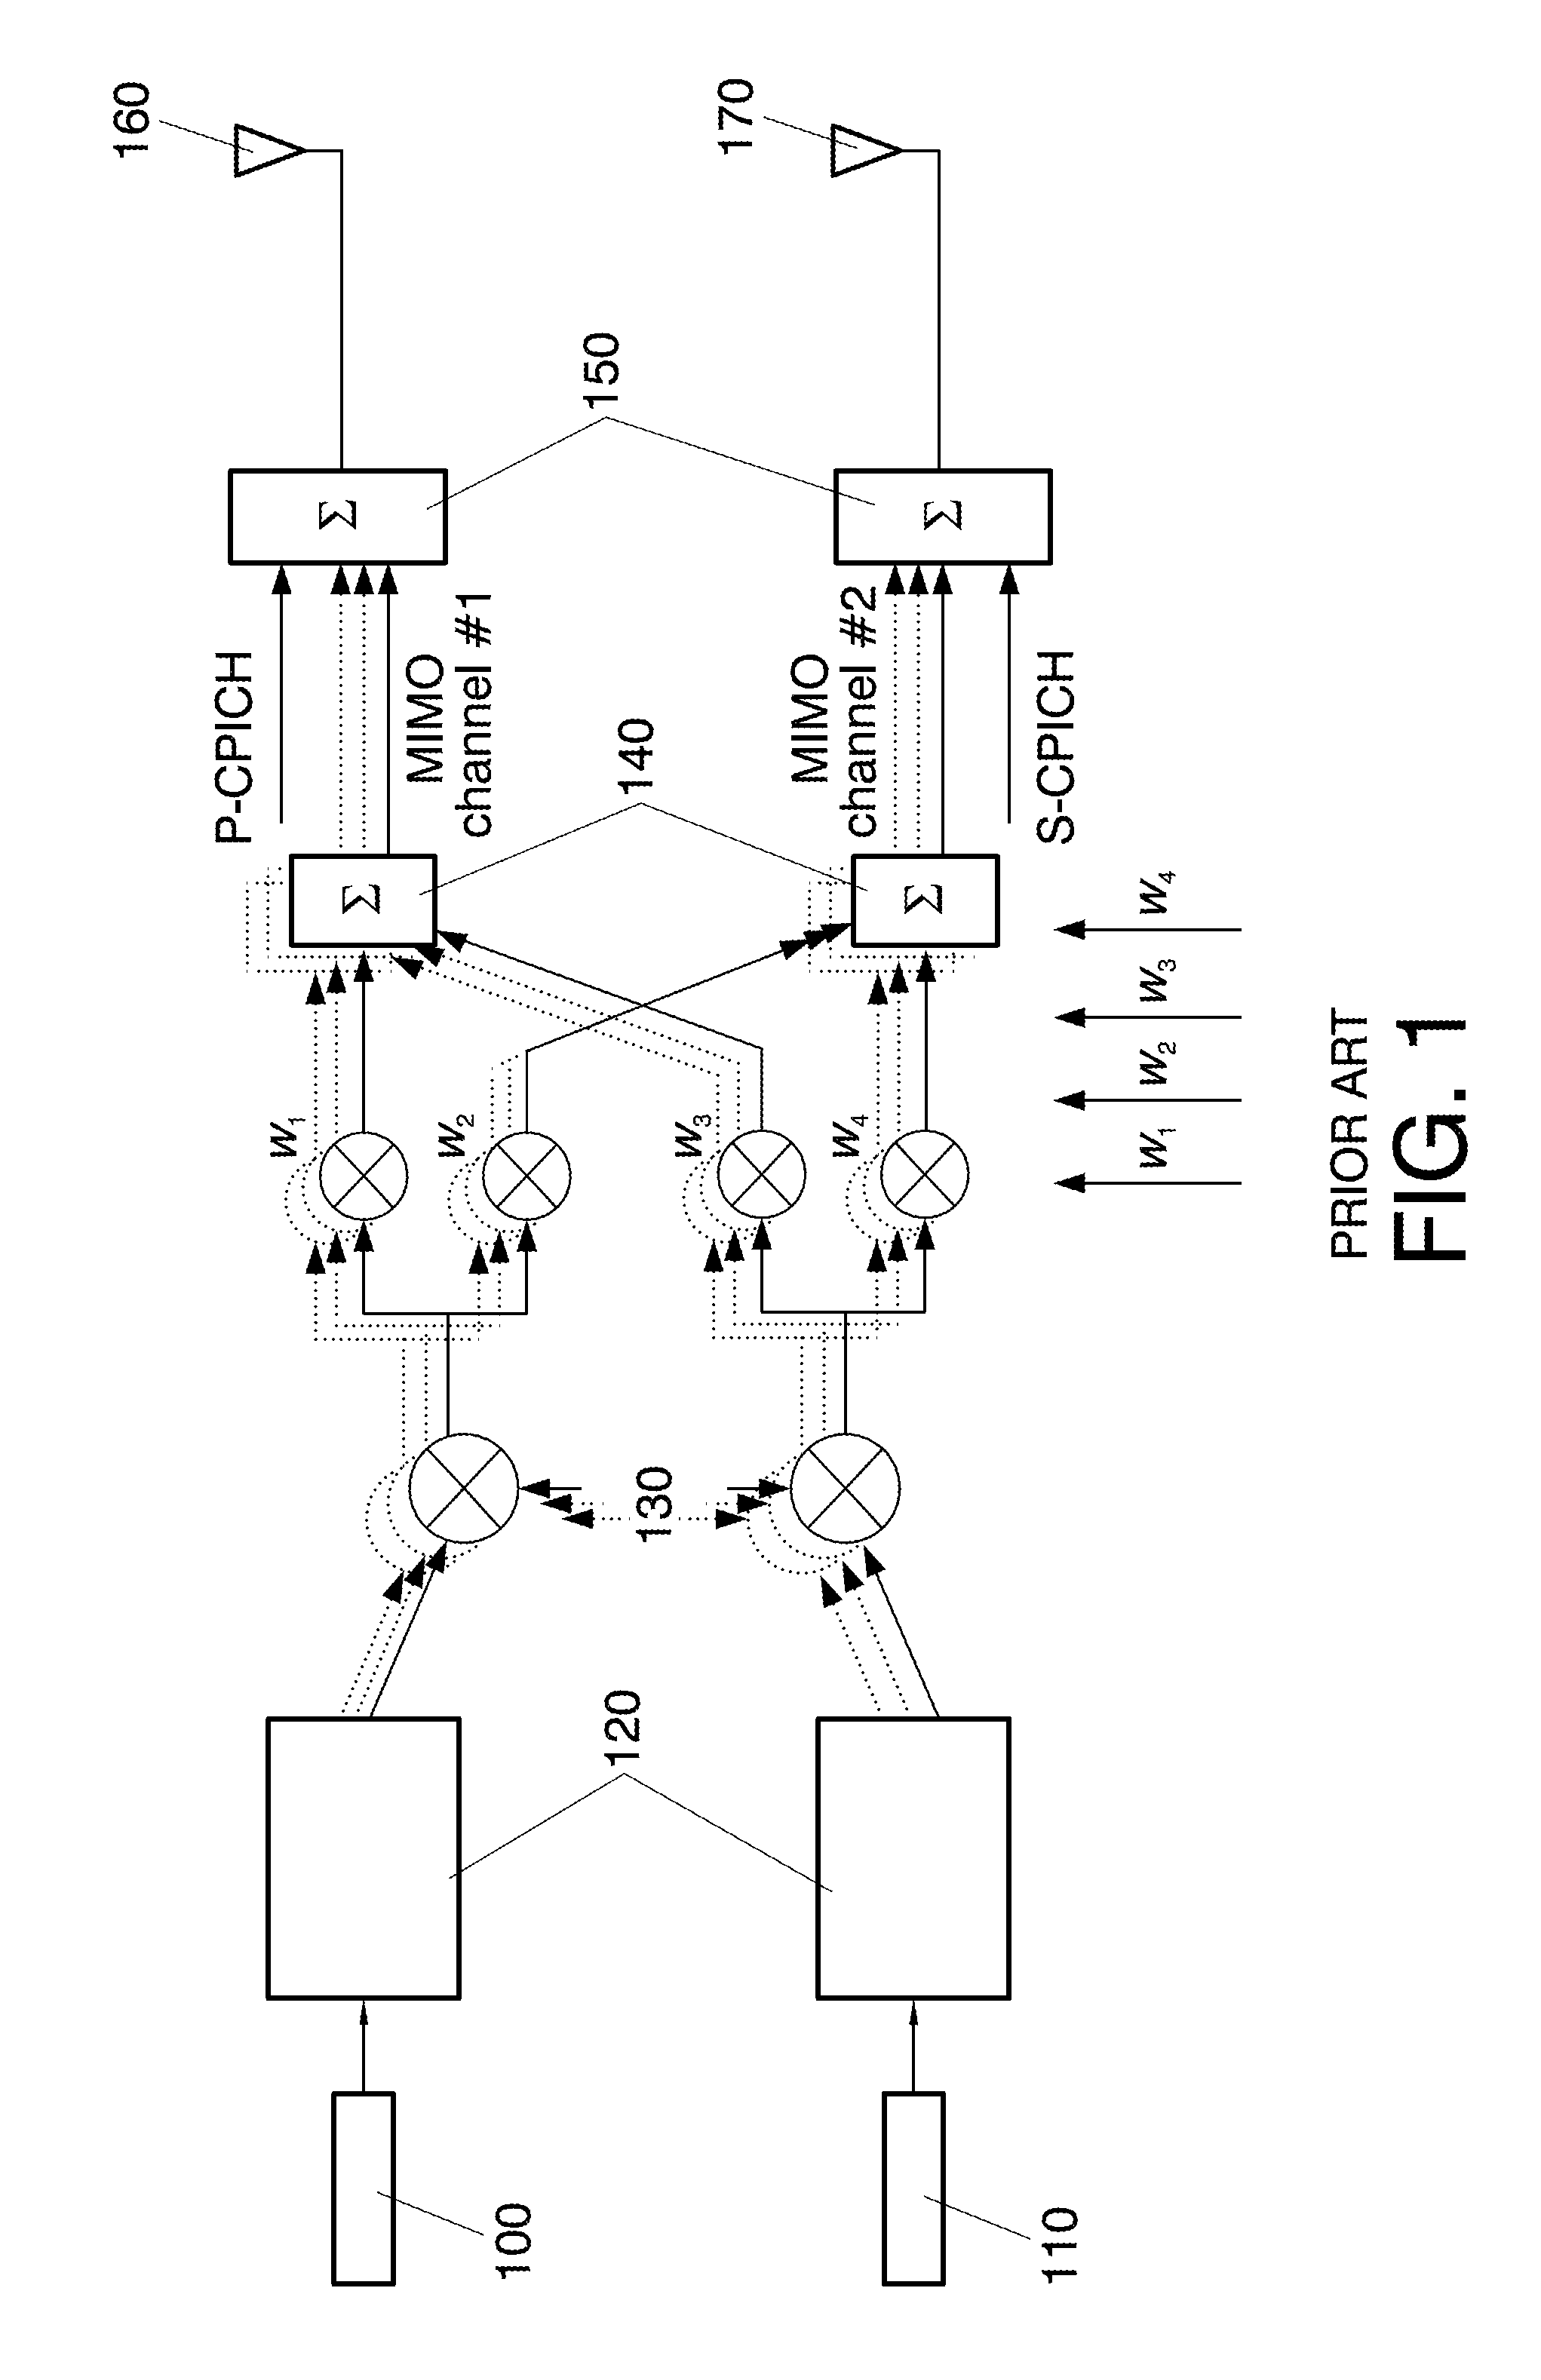 Phase difference in a mobile communication network